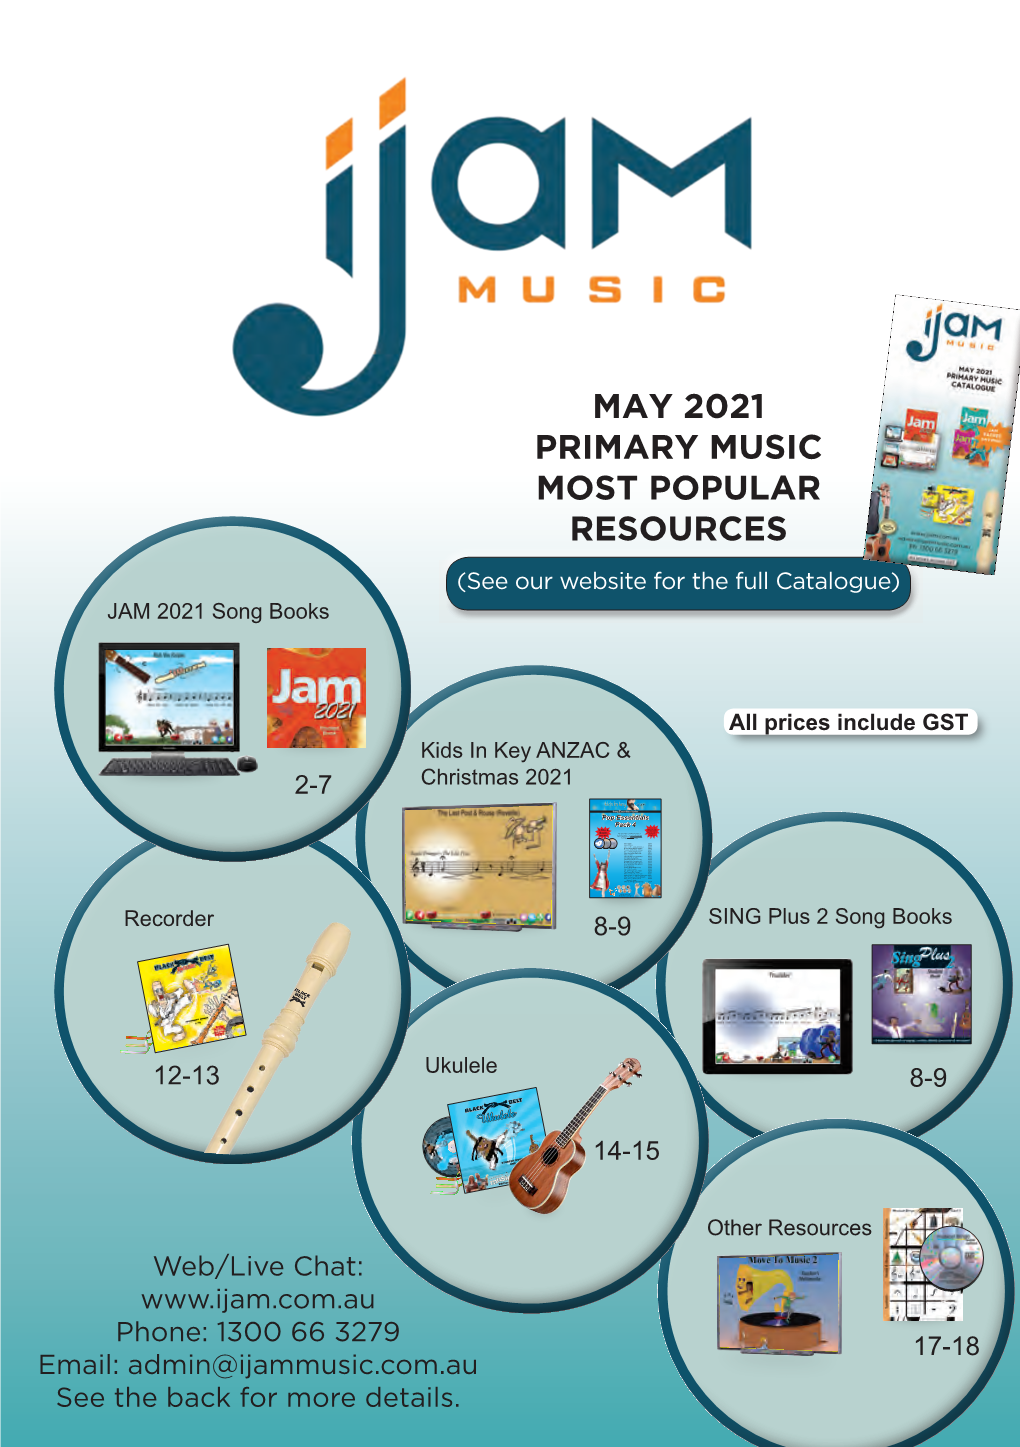 MAY 2021 PRIMARY MUSIC MOST POPULAR RESOURCES (See Our Website for the Full Catalogue) JAM 2021 Song Books